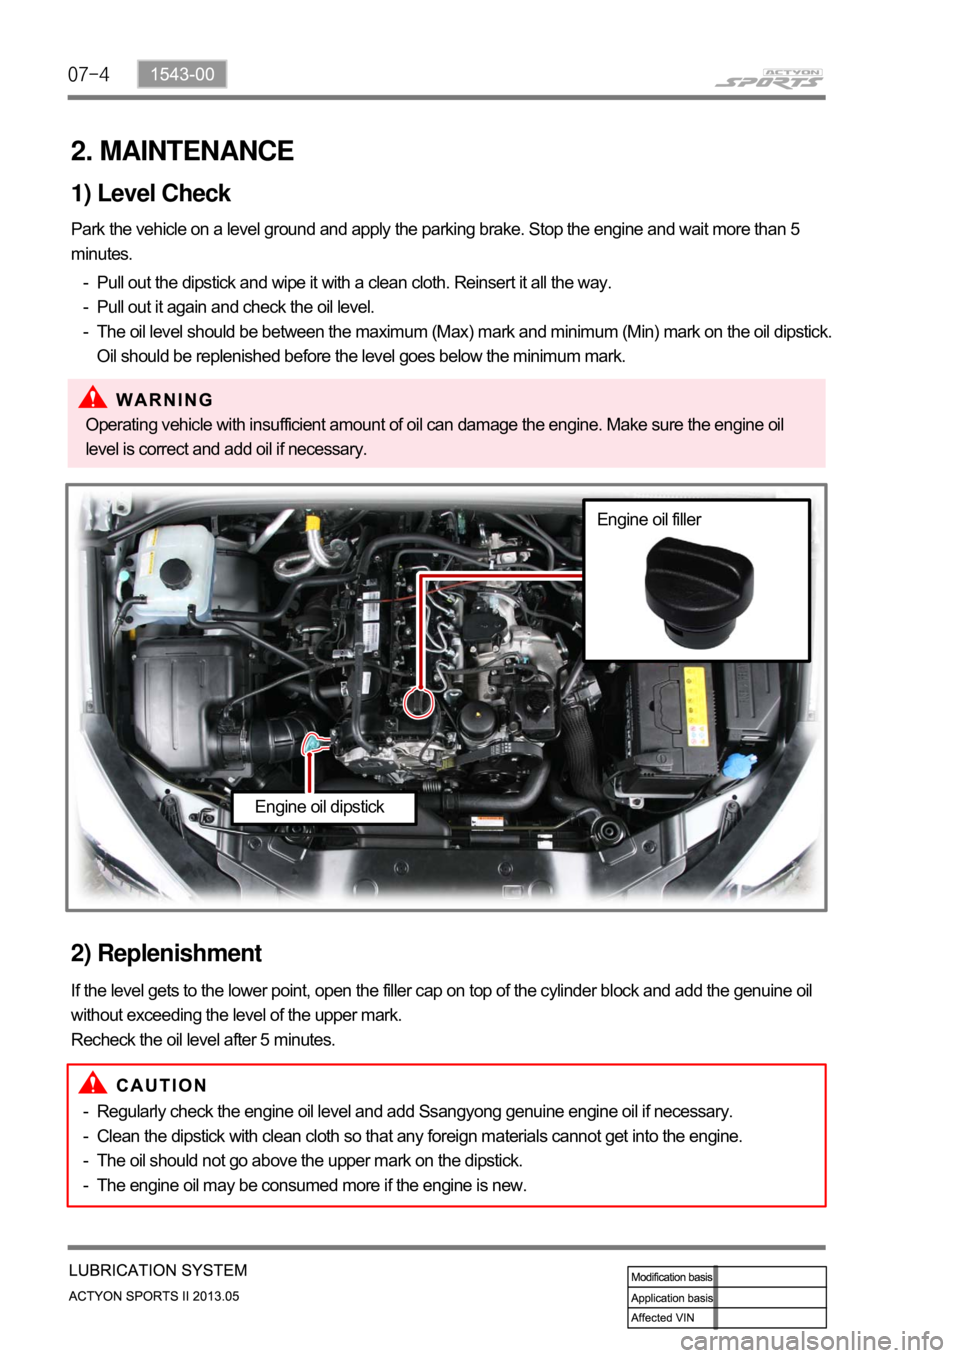 SSANGYONG NEW ACTYON SPORTS 2013  Service Manual 07-4
2. MAINTENANCE
1) Level Check
Park the vehicle on a level ground and apply the parking brake. Stop the engine and wait more than 5 
minutes.Pull out the dipstick and wipe it with a clean cloth. R